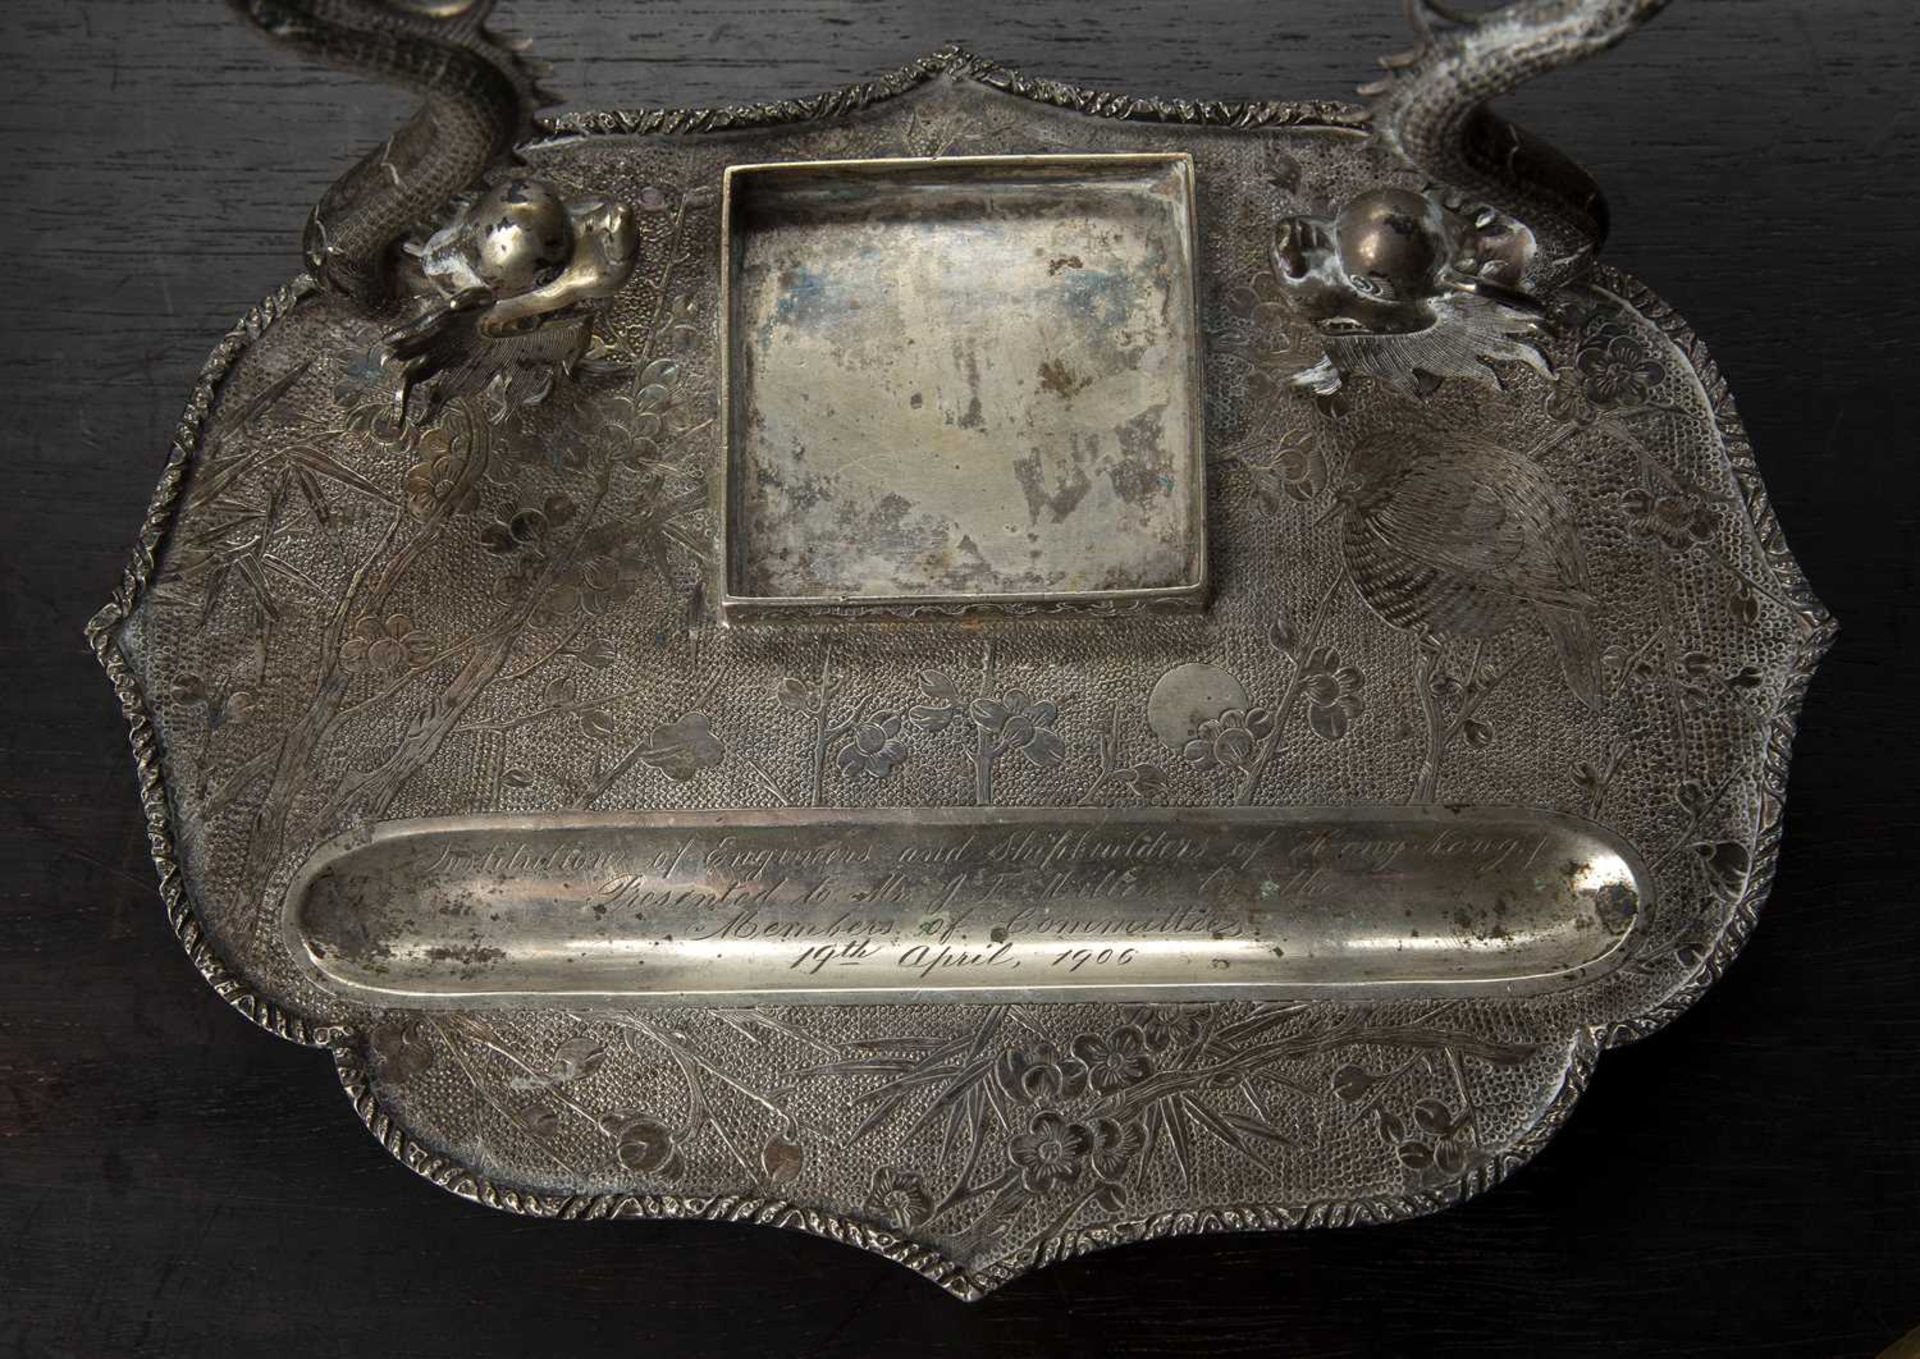 White metal/silver pen and inkstand awarded to John Finlay Miller (1869-1949) and related - Image 3 of 9